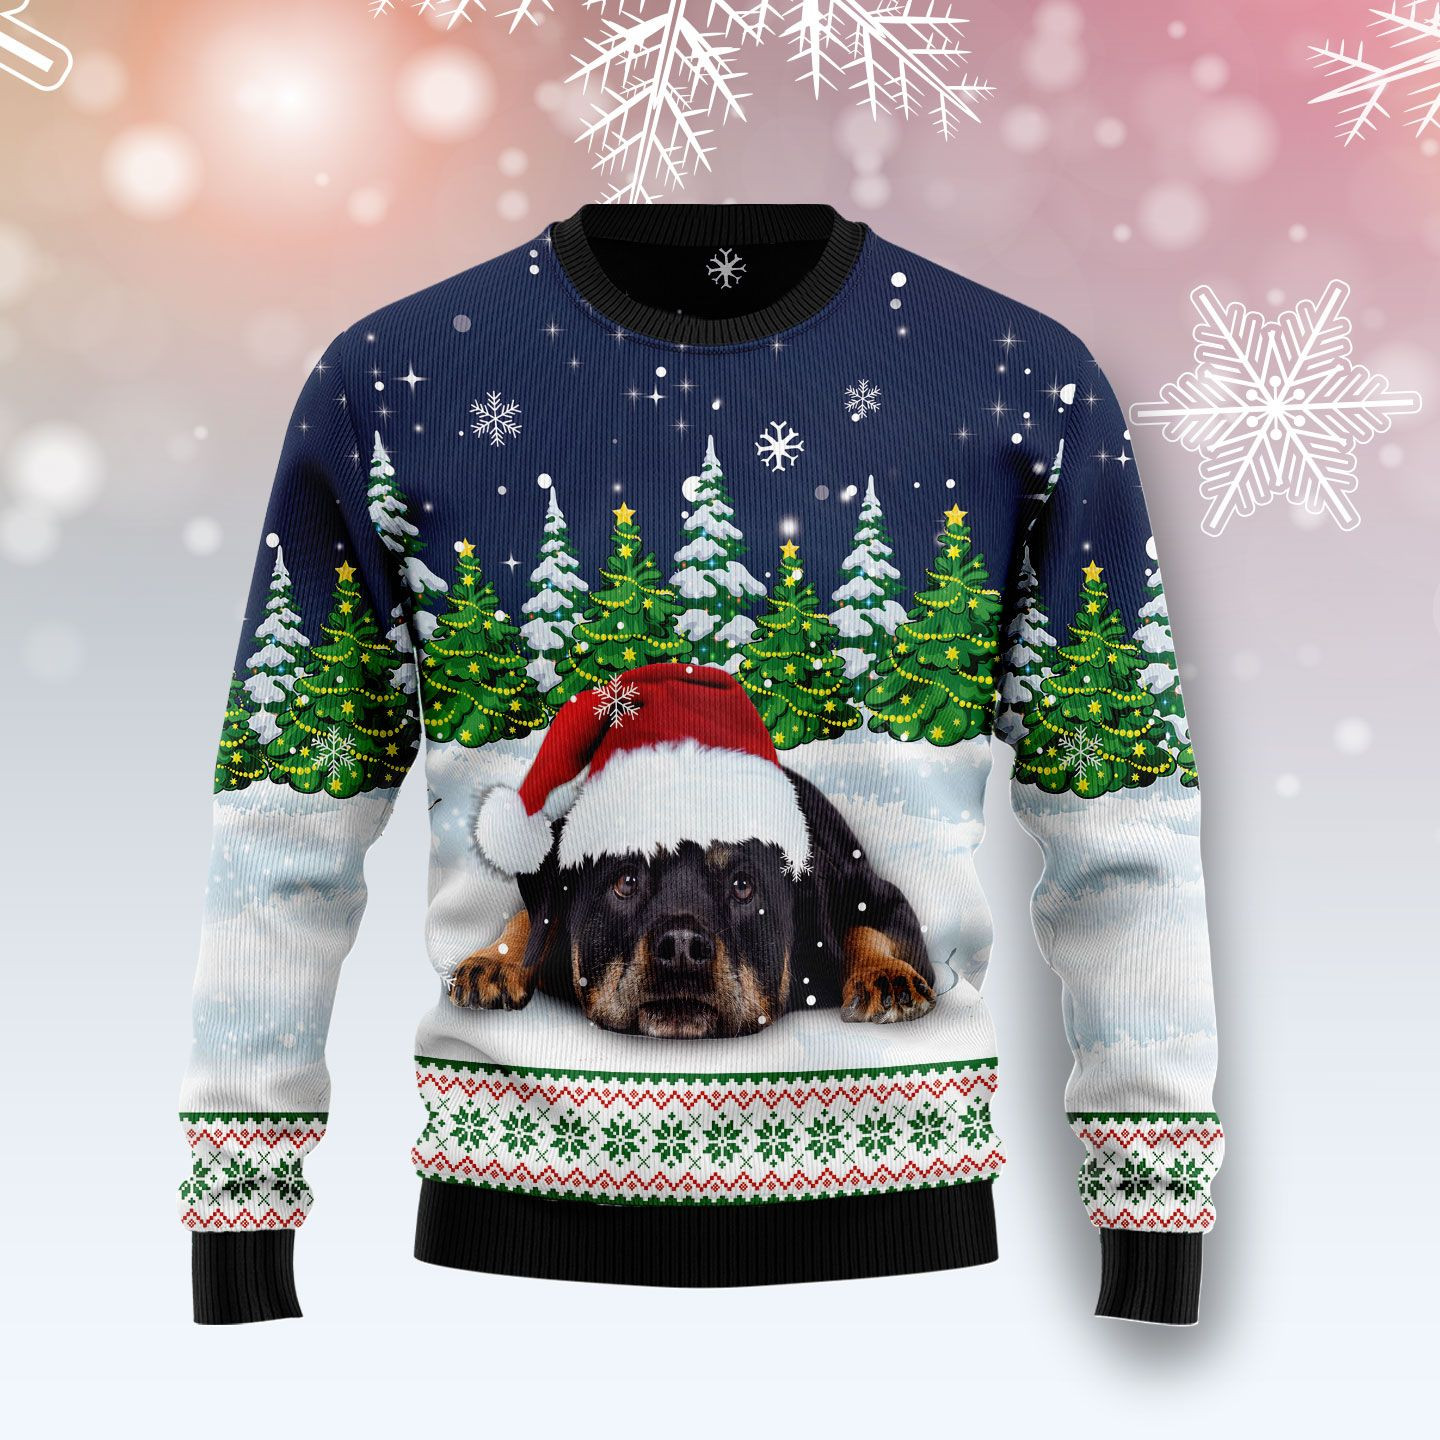 Dreaming Rottweiler Under Snow Ugly Christmas Sweater Ugly Sweater For Men Women, Holiday Sweater